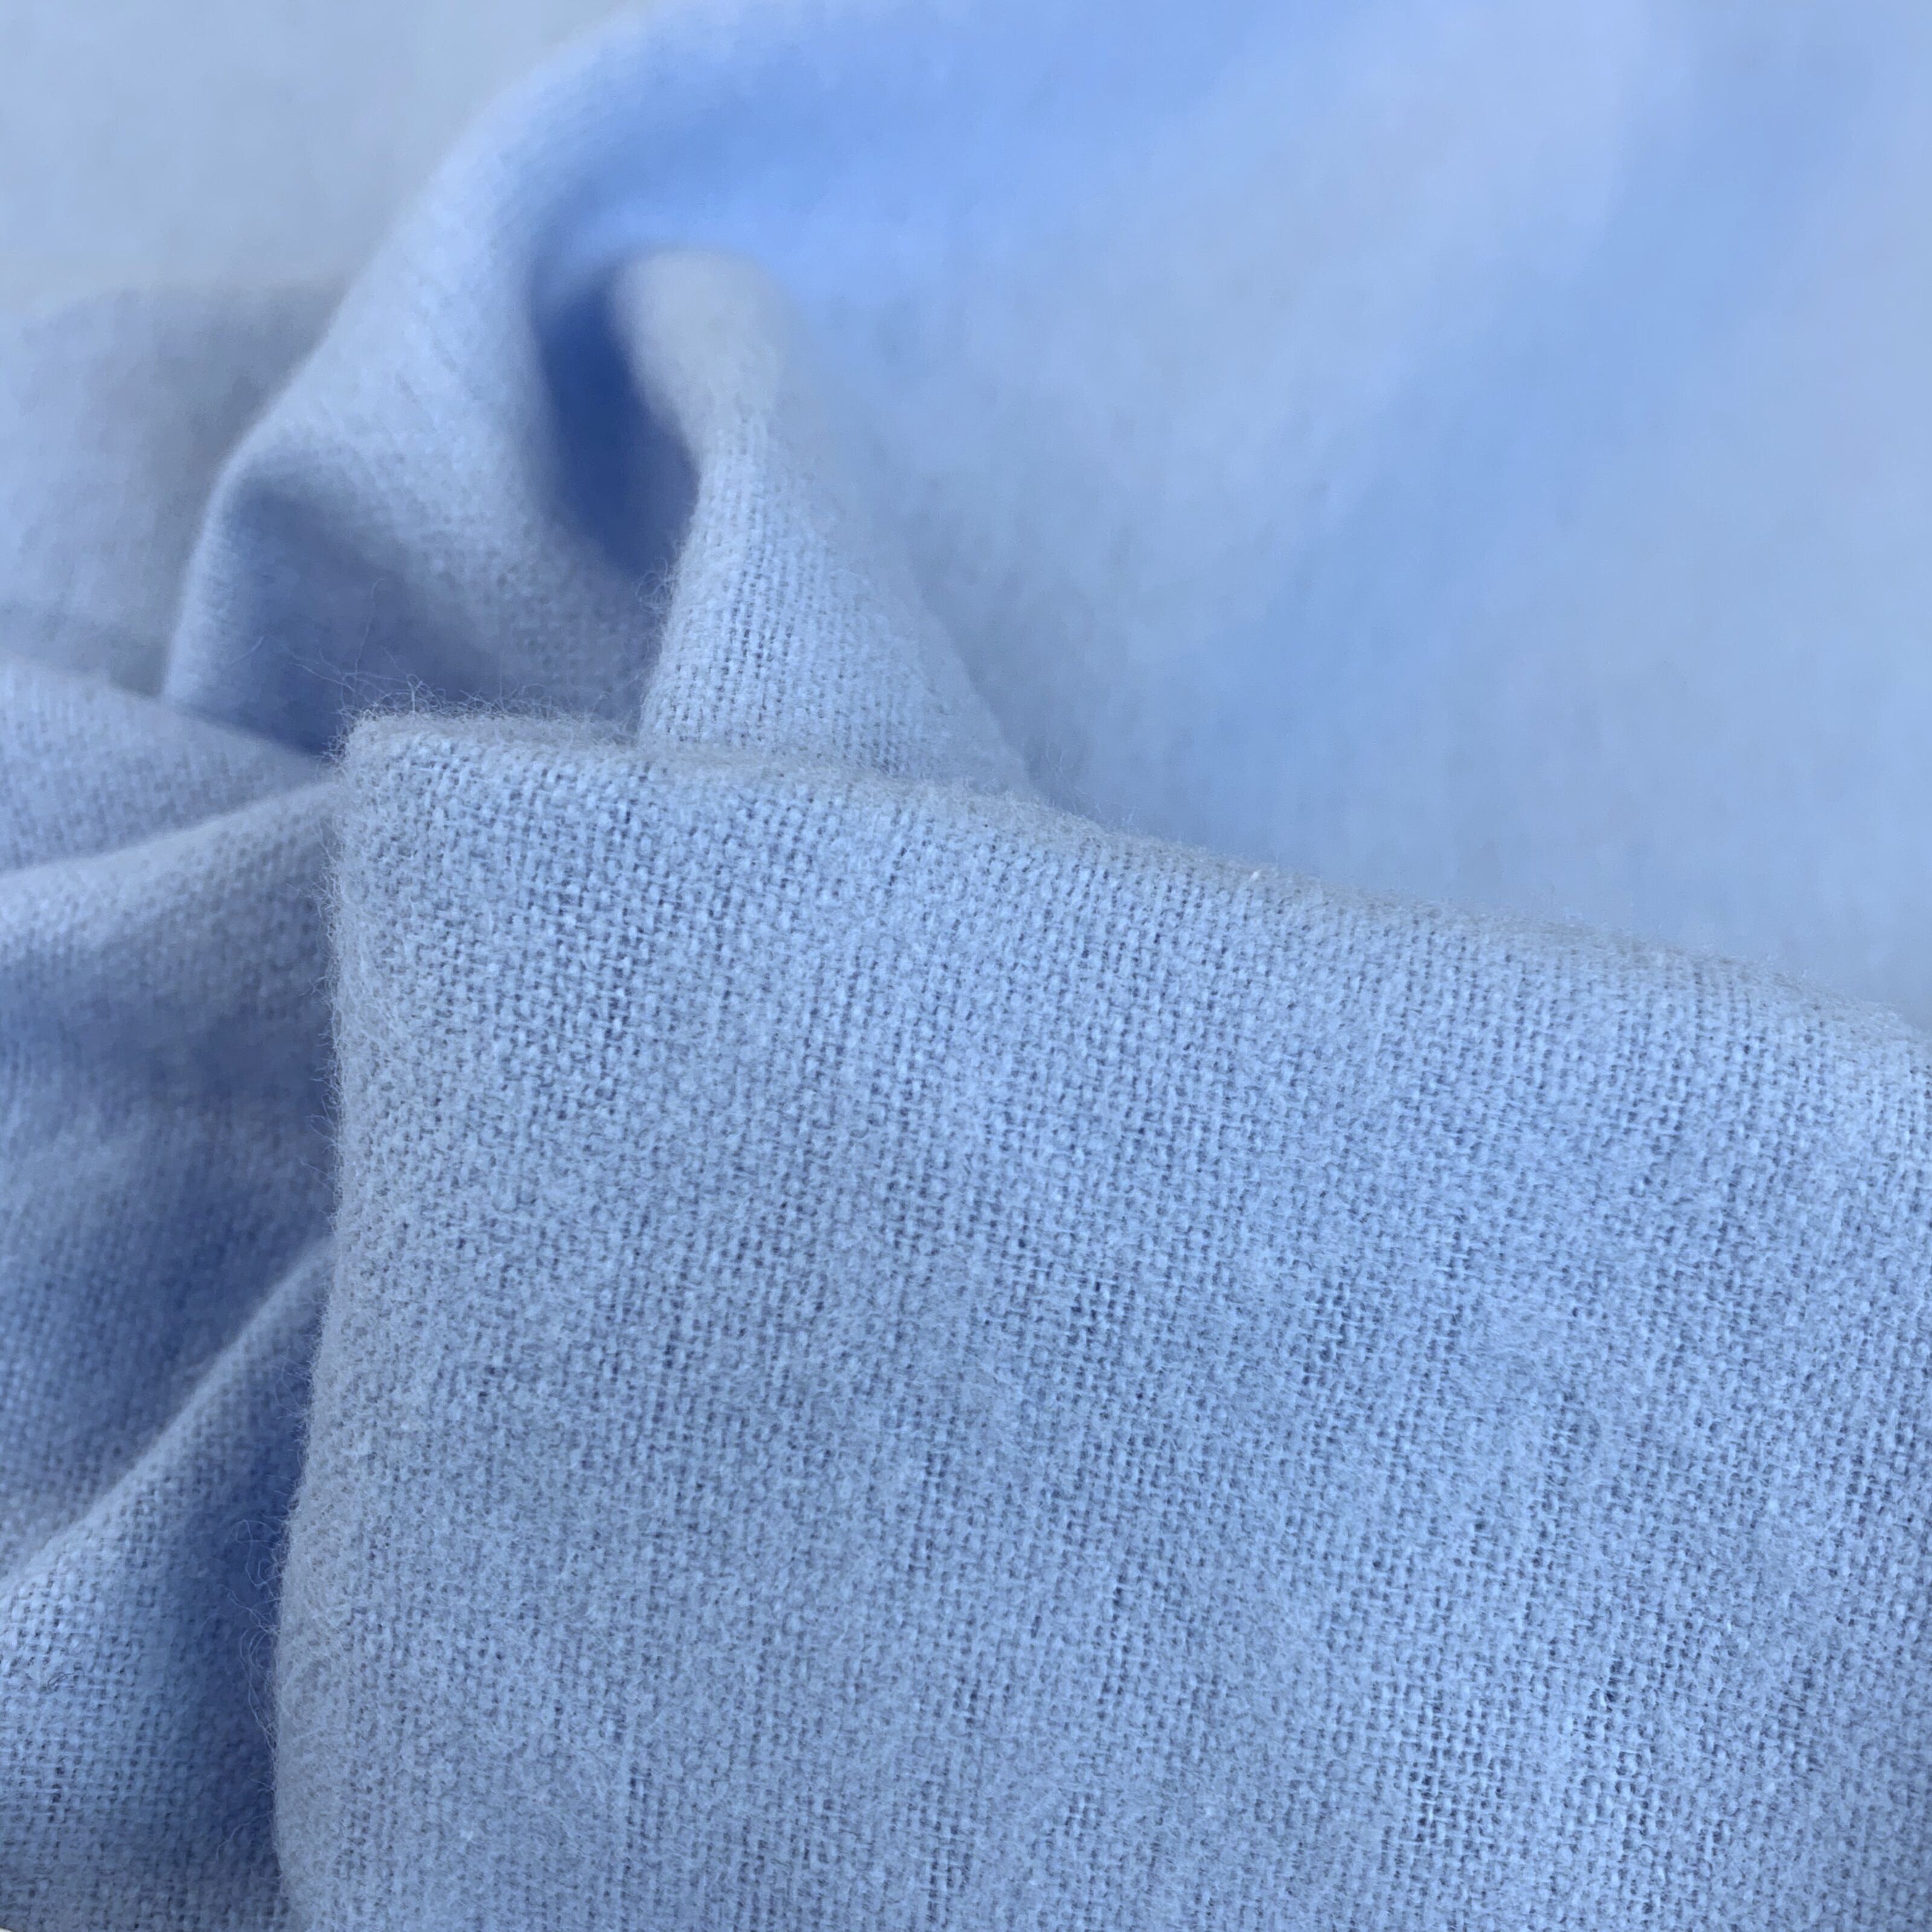 https://www.croftmill.co.uk/images/pictures/2-2021/01-january-2021/winceyette-plain-pale-blue-cotton-flannel-fabric-close-up-(gallery).jpg?v=656e6374